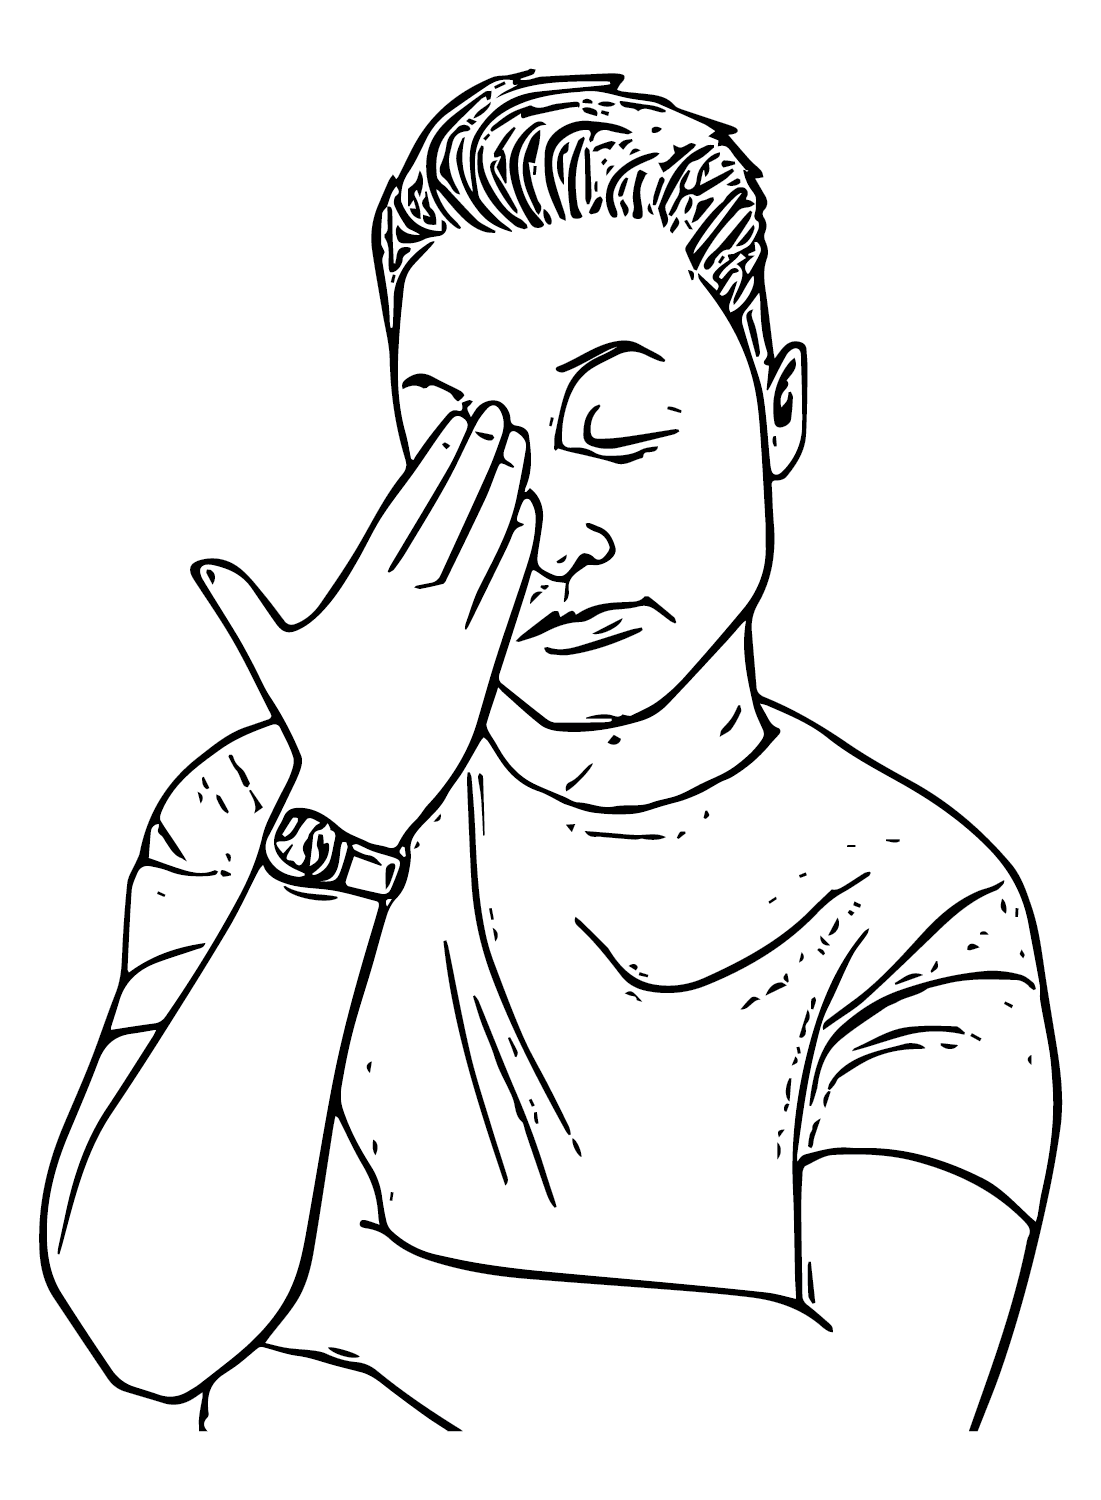 Elon Musk Free Coloring Page